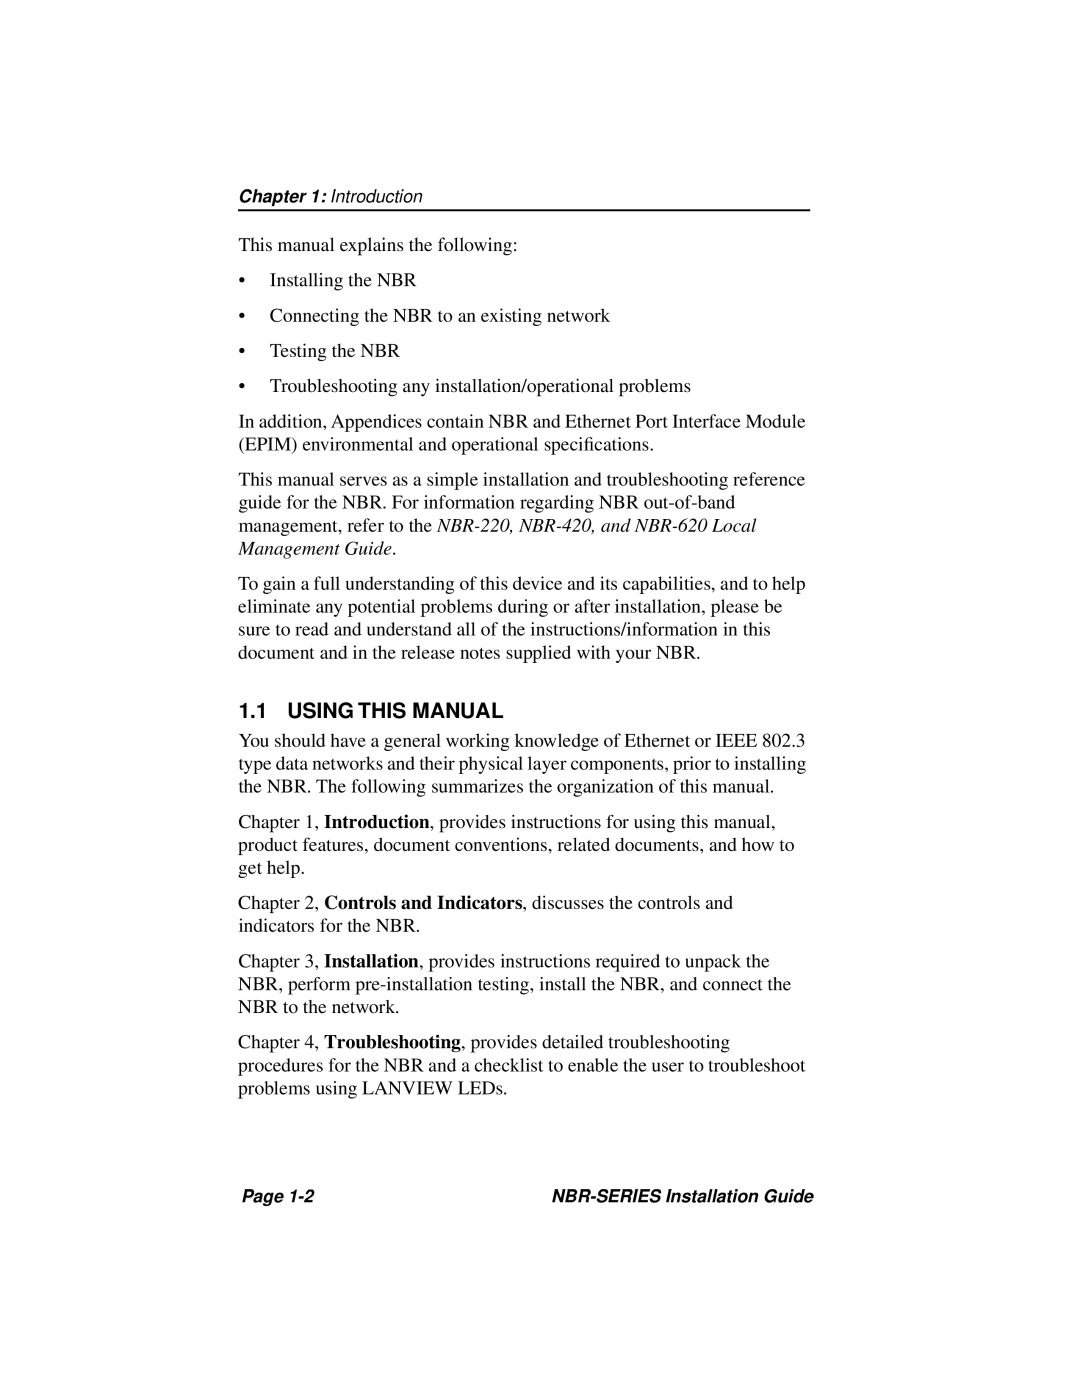 Cabletron Systems NBR-220, NBR-420, NBR-620 manual Using This Manual 